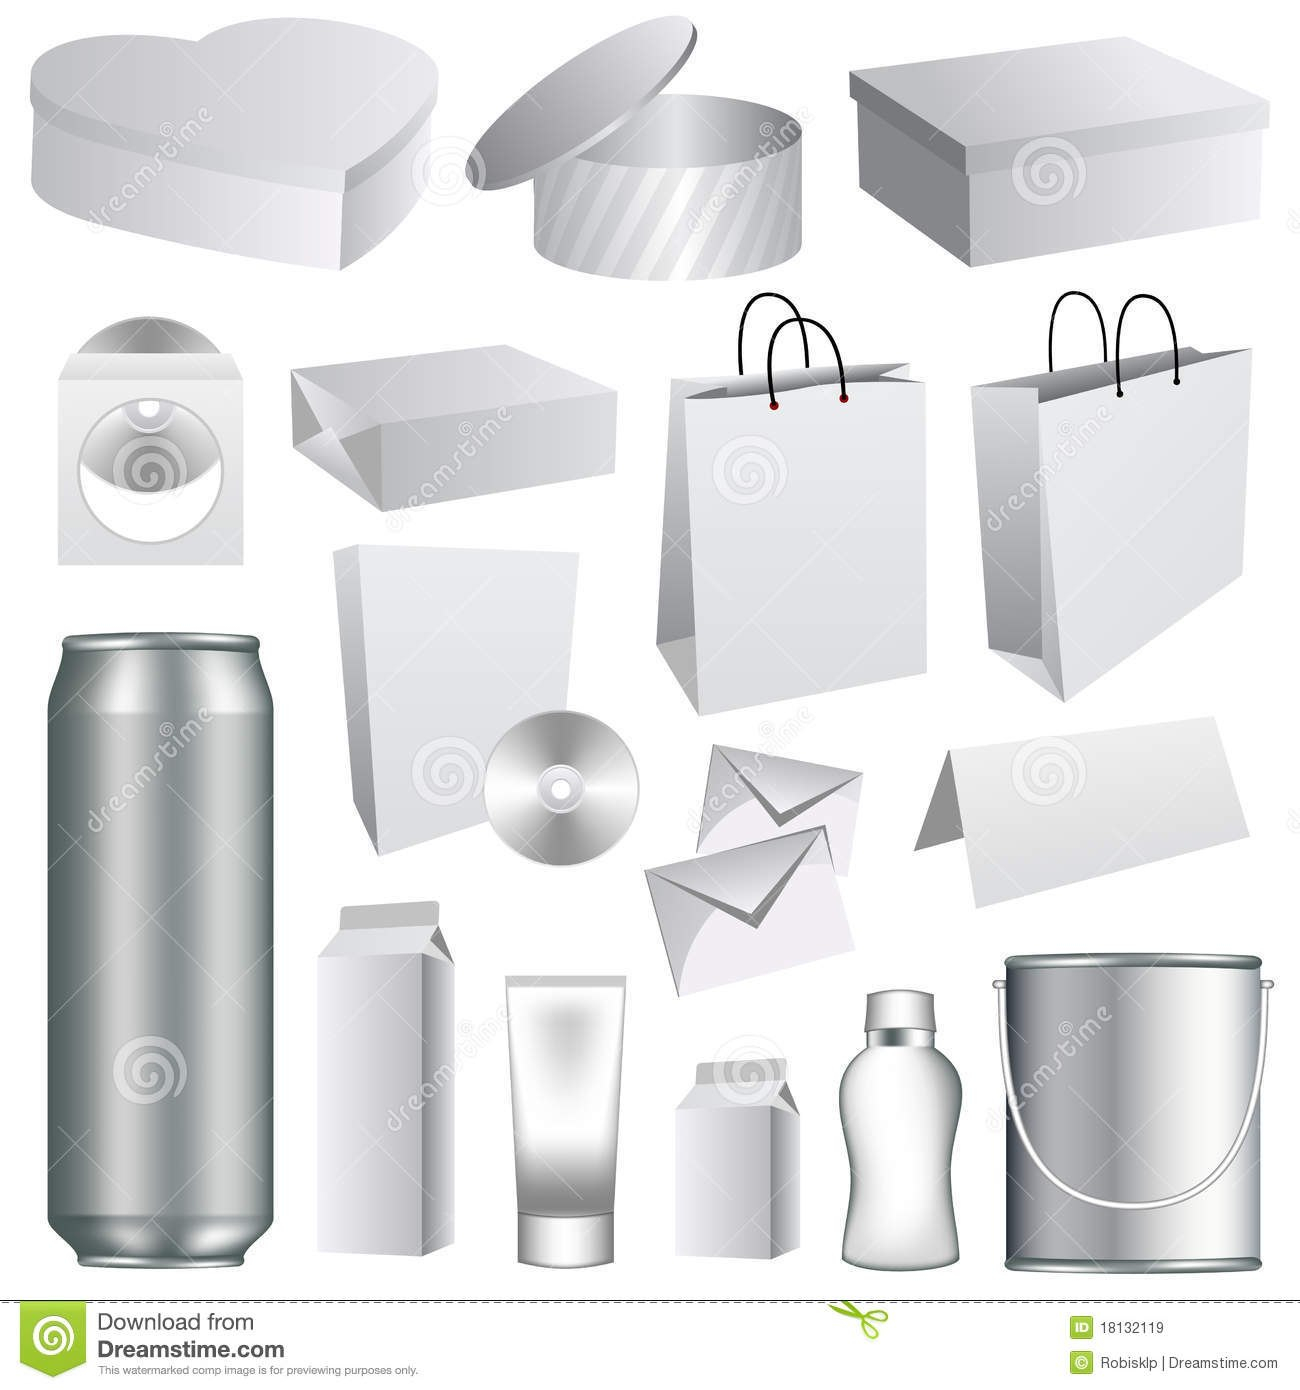 Blank Packaging Templates Stock Vector Illustration Of Promotion within Blank Packaging Templates